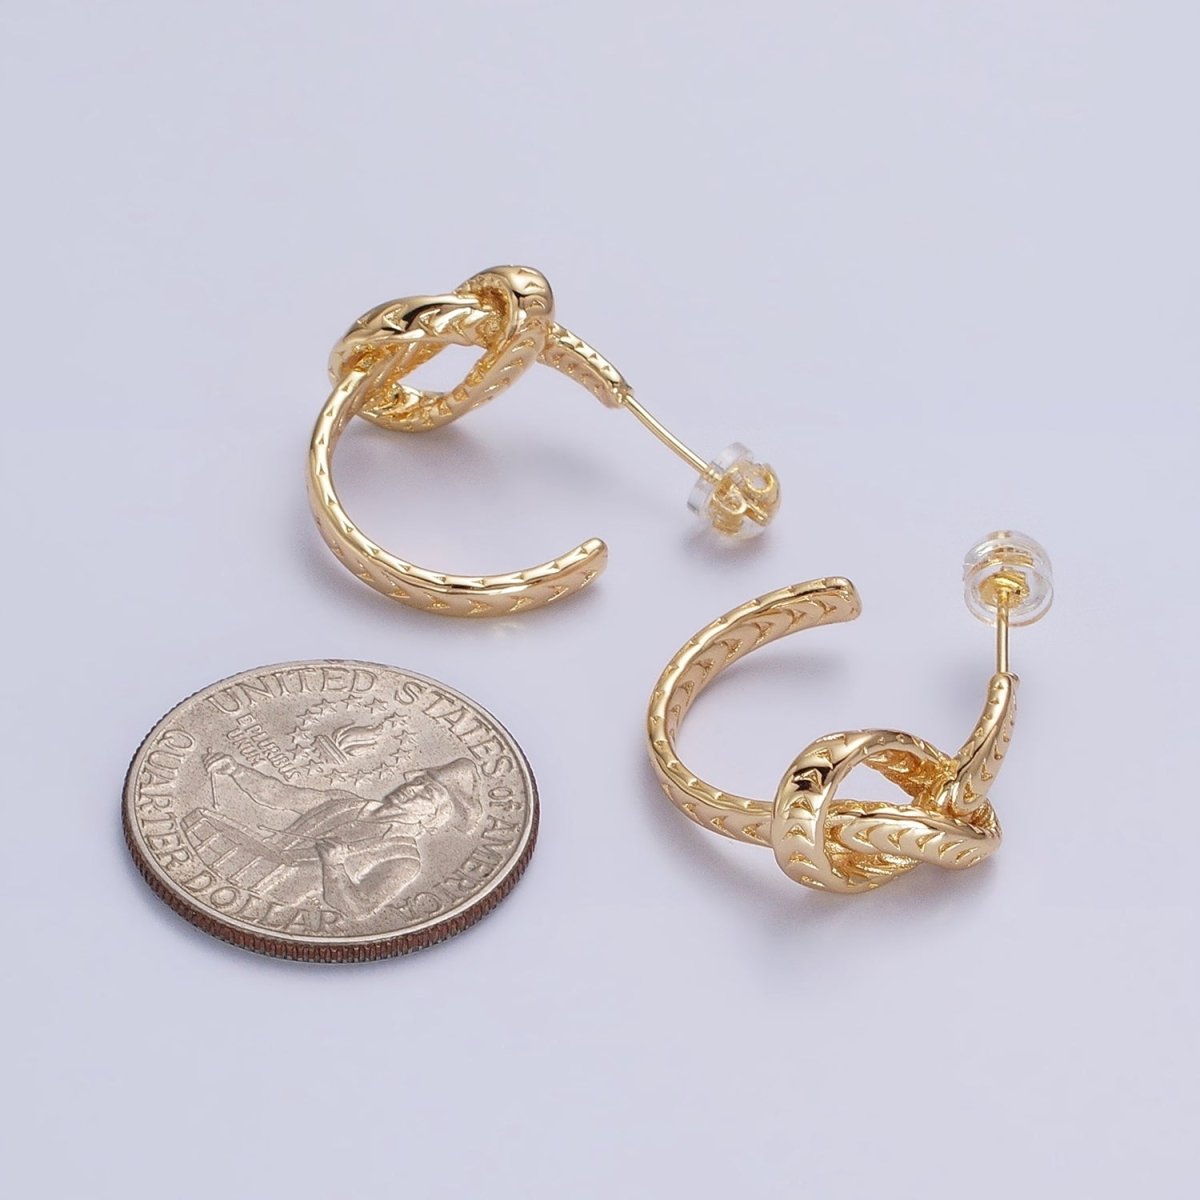 Silver Knot Hoop Earrings • Gold Tie The Knot Hoops • Love Knot Hoops AB604 AB605 - DLUXCA